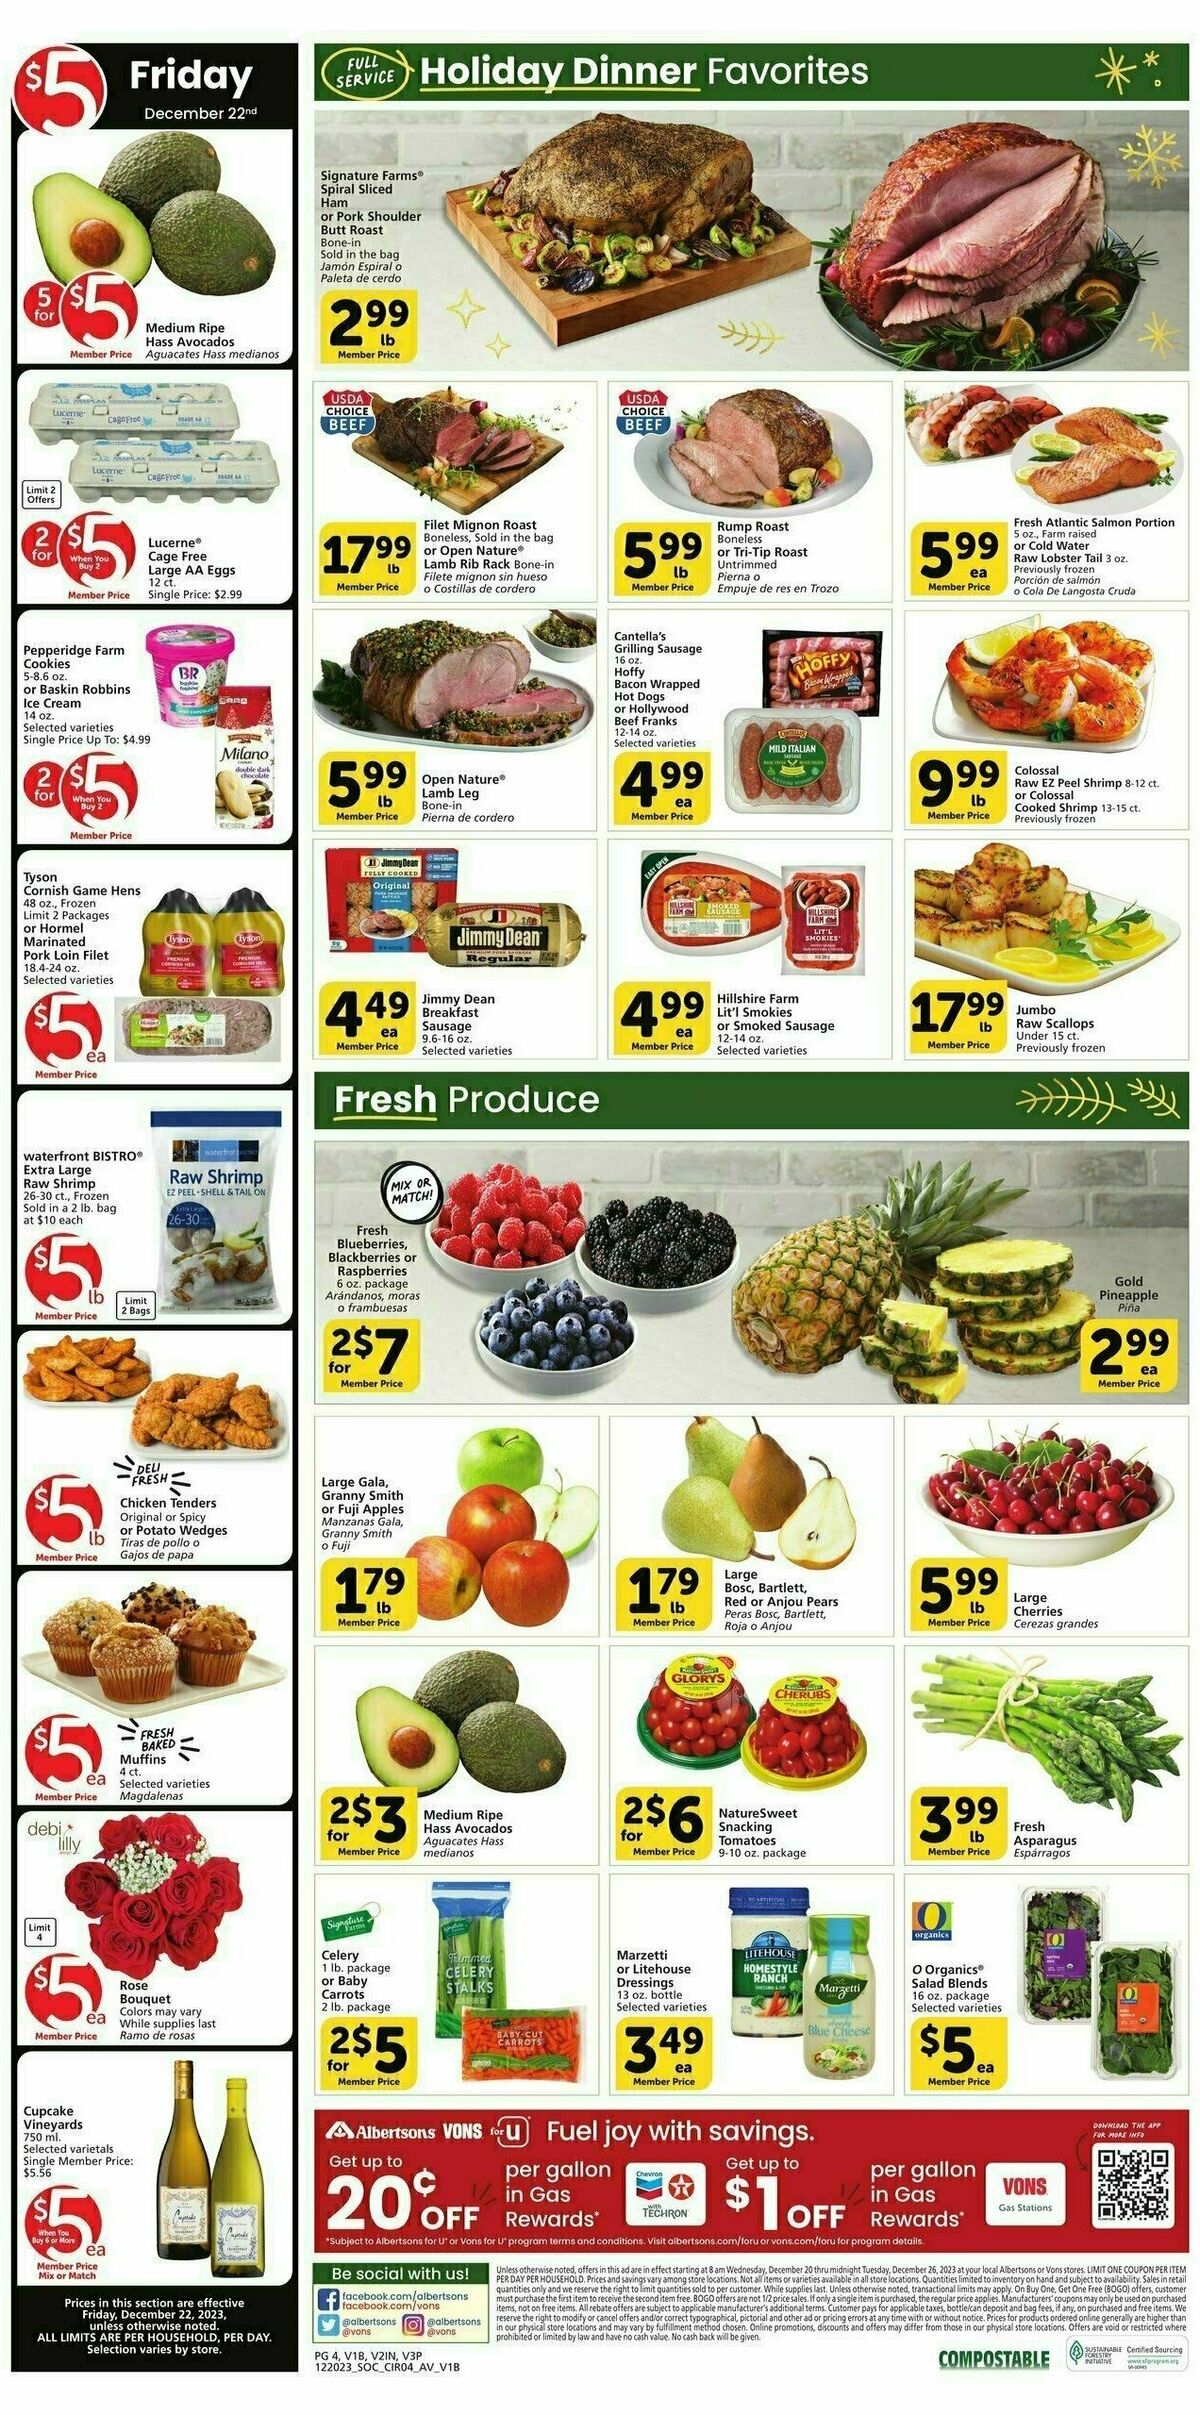 Vons Weekly Ad from December 20